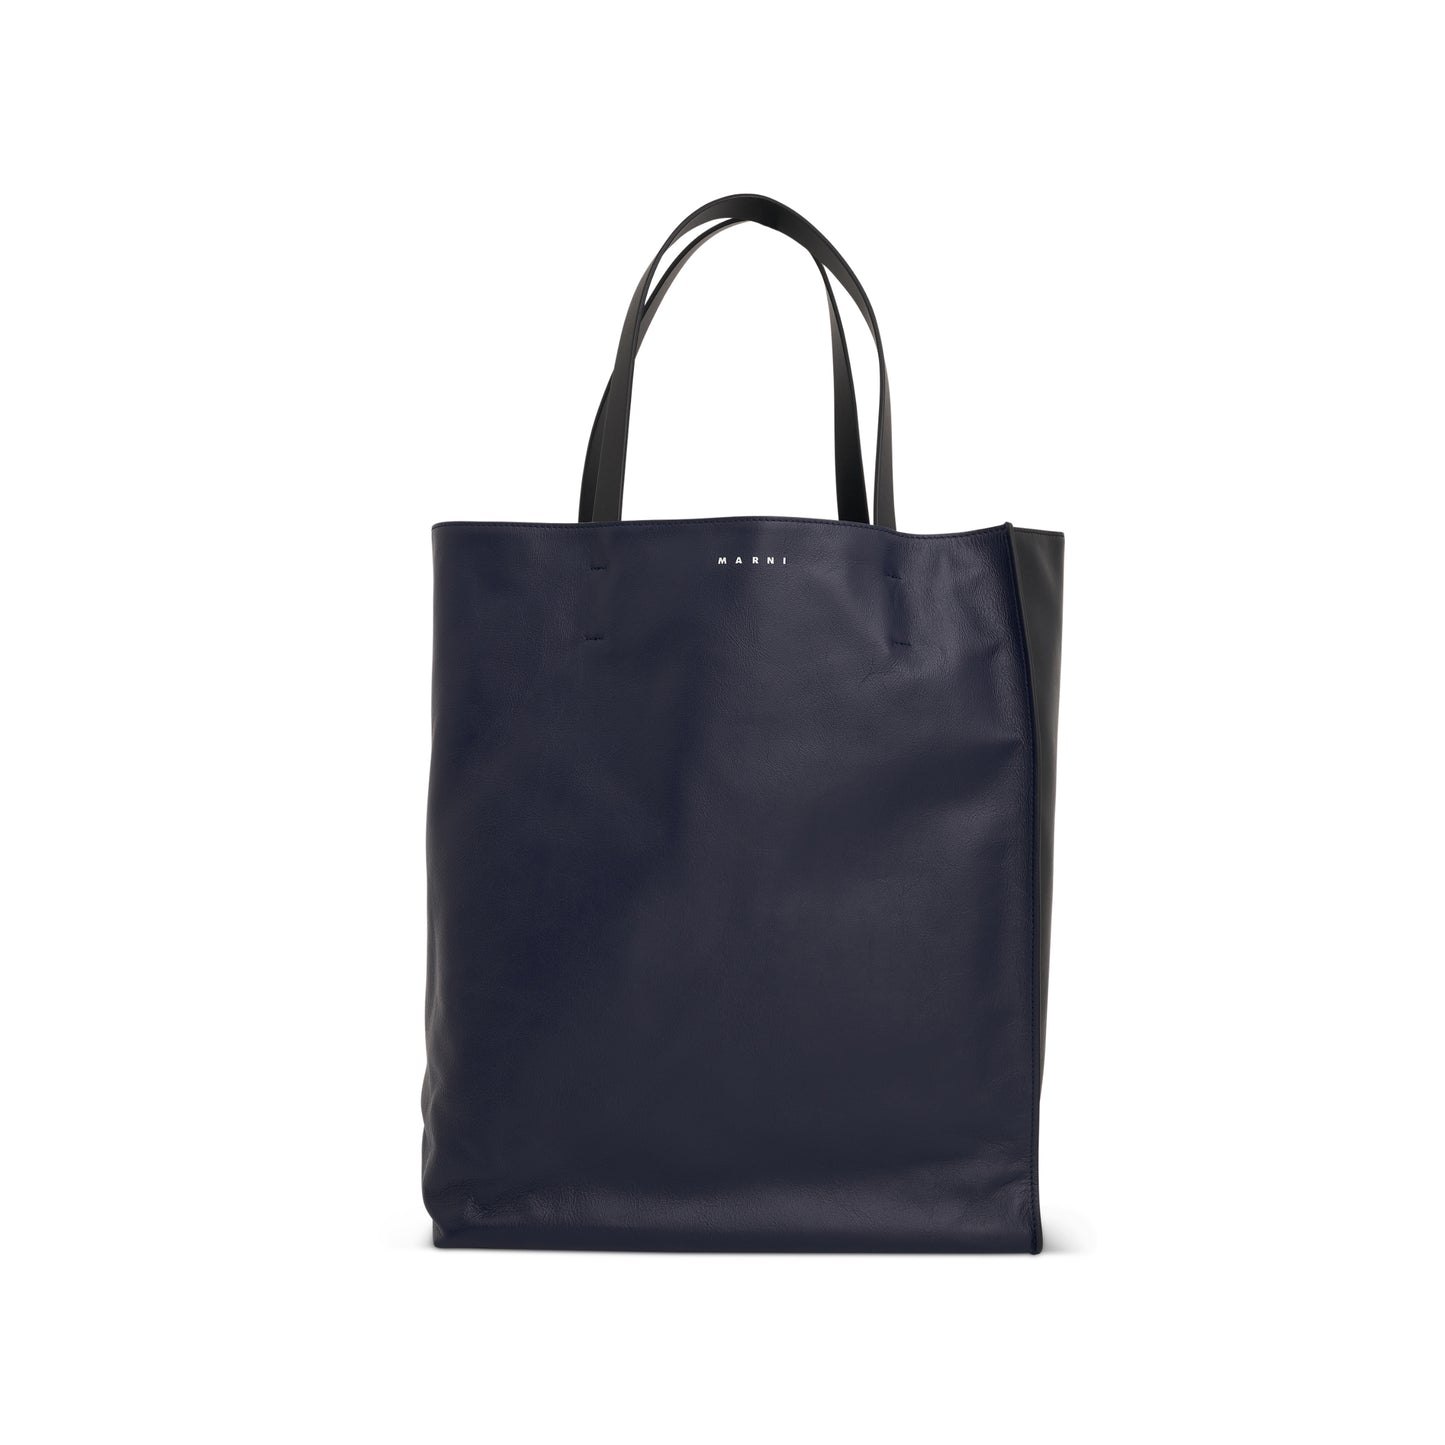 Museo Soft Large Tote Bag in Navy Blue/Black